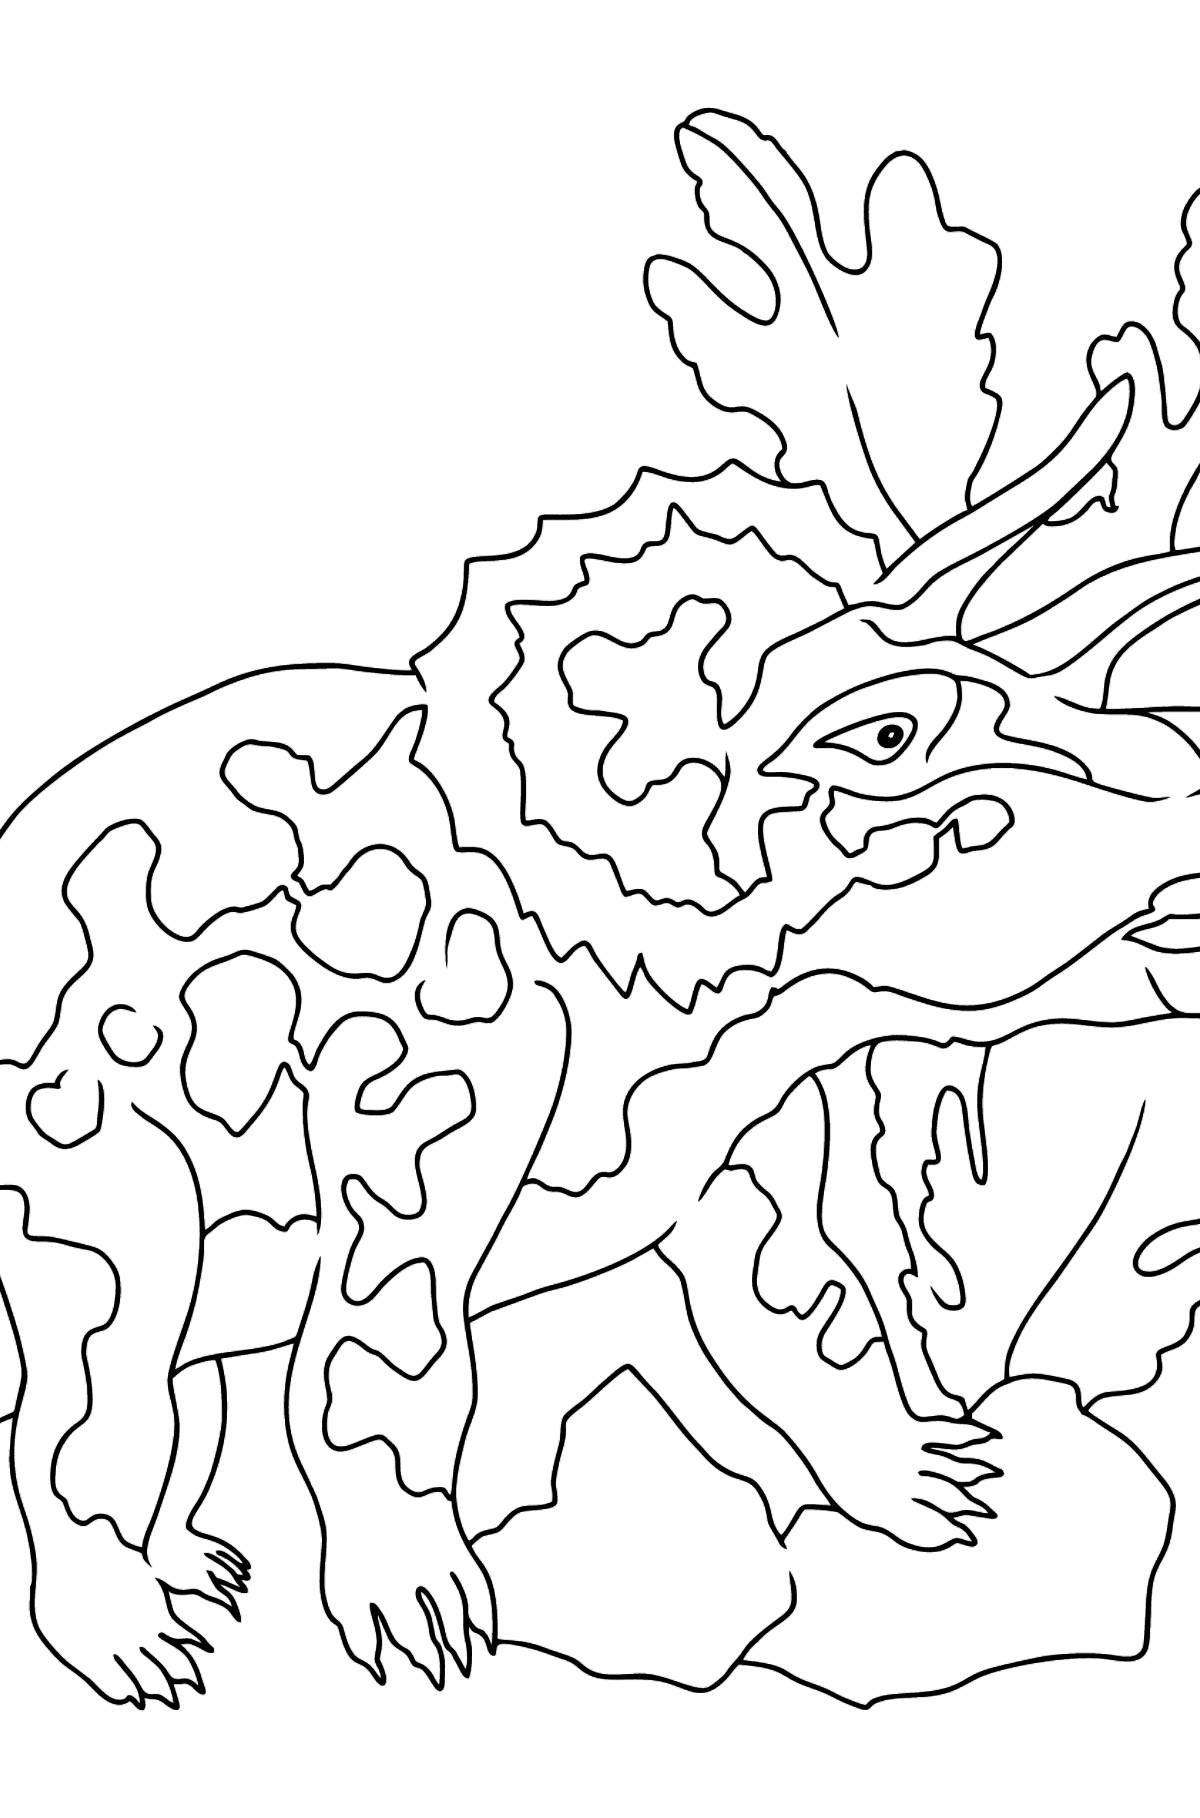 Triceratops Coloring Page (simple) - Coloring Pages for Kids